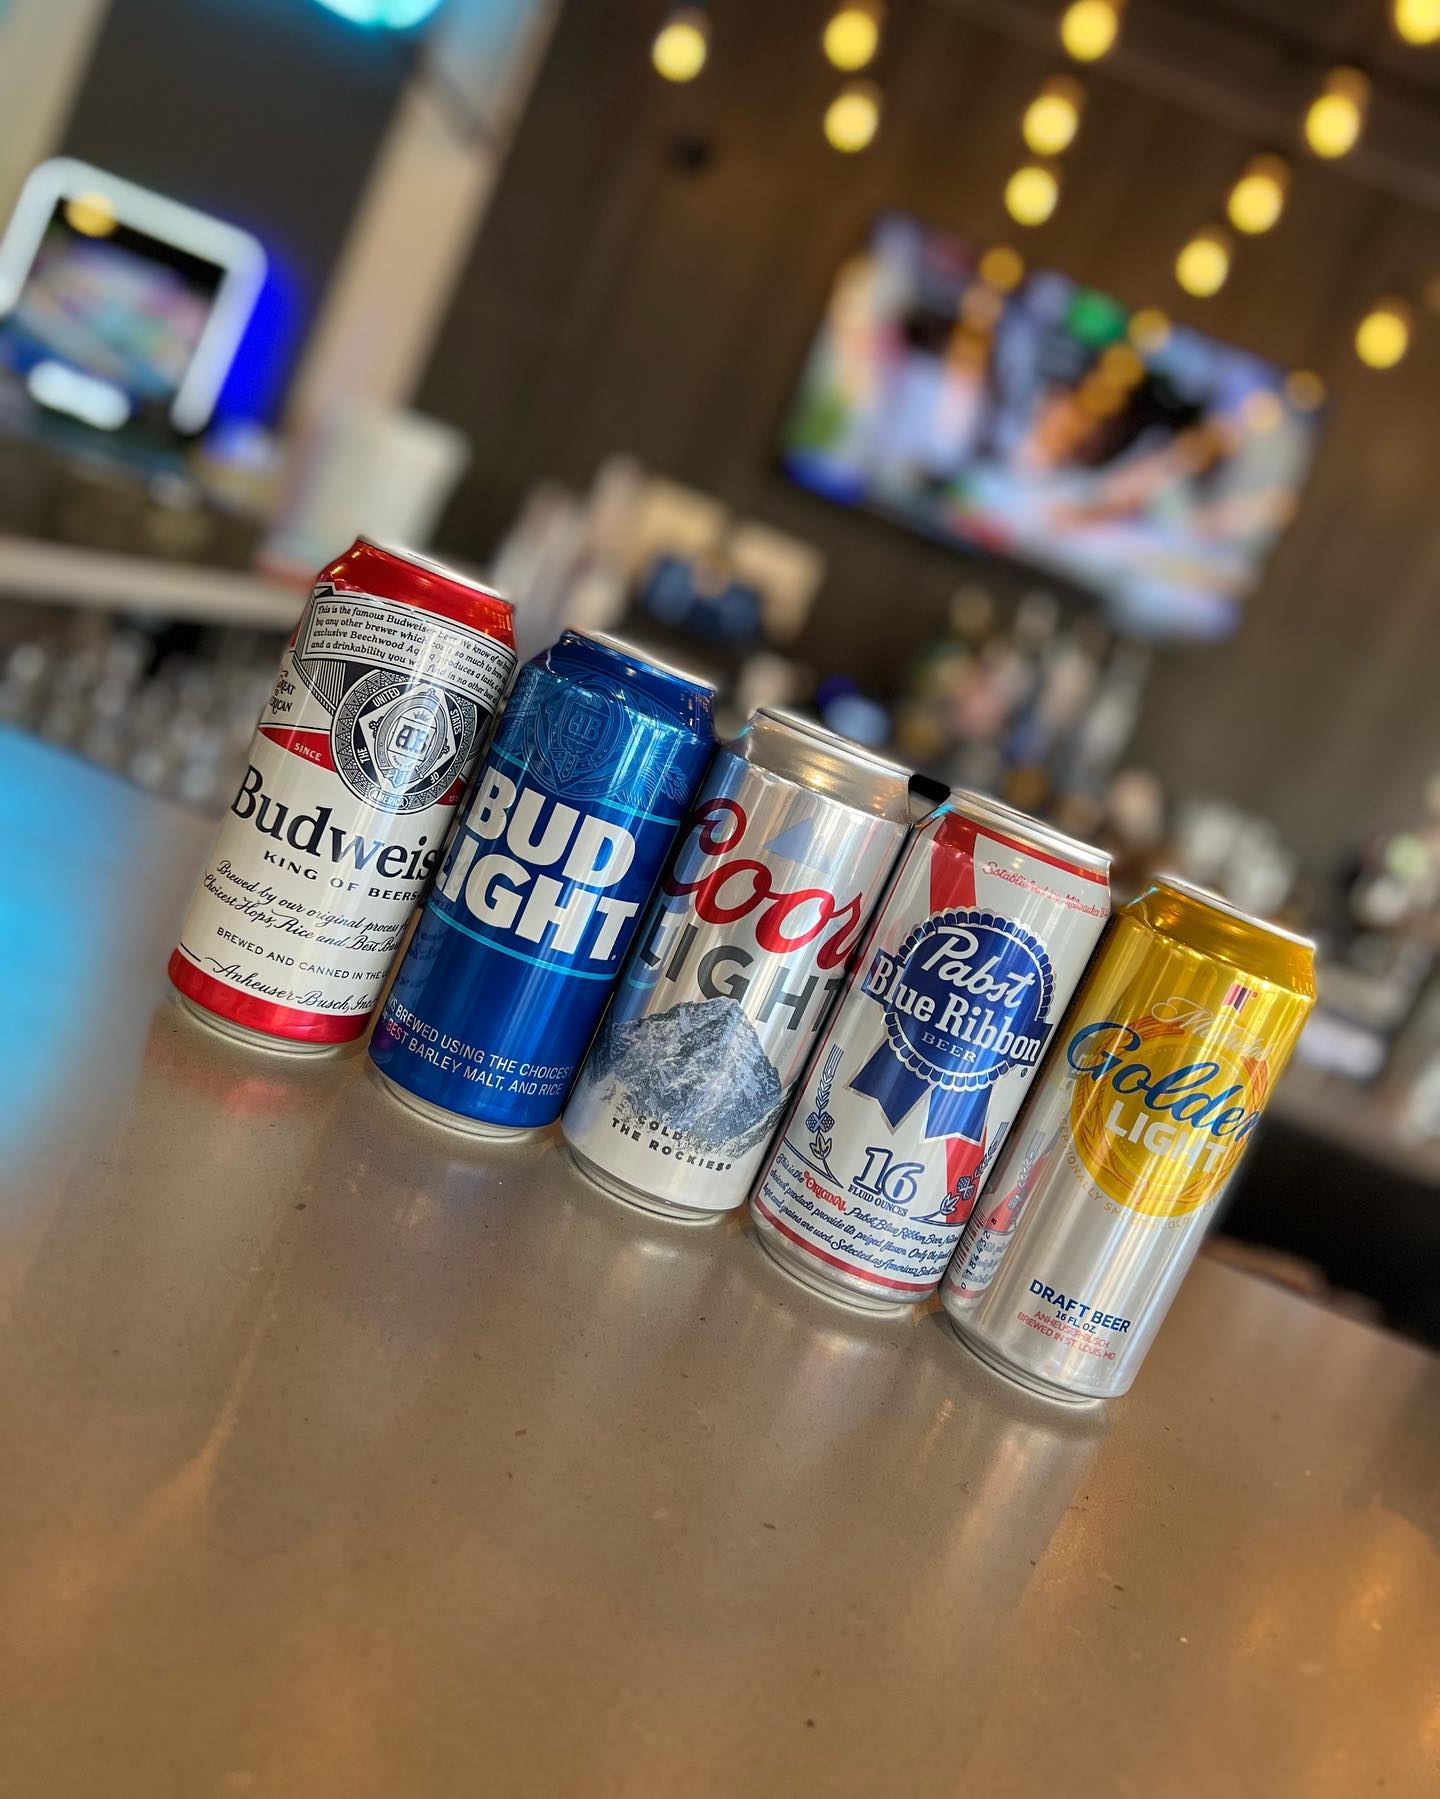 Our NFL game day special is back tonight from 5pm-9pm! Enjoy a 16oz Domestic can for $3.25, a Bloody Mary for $4.50, Chips ‘N’ Dip for $7, Cheese Curds for $7, and Cauliflower Poppers for $7!